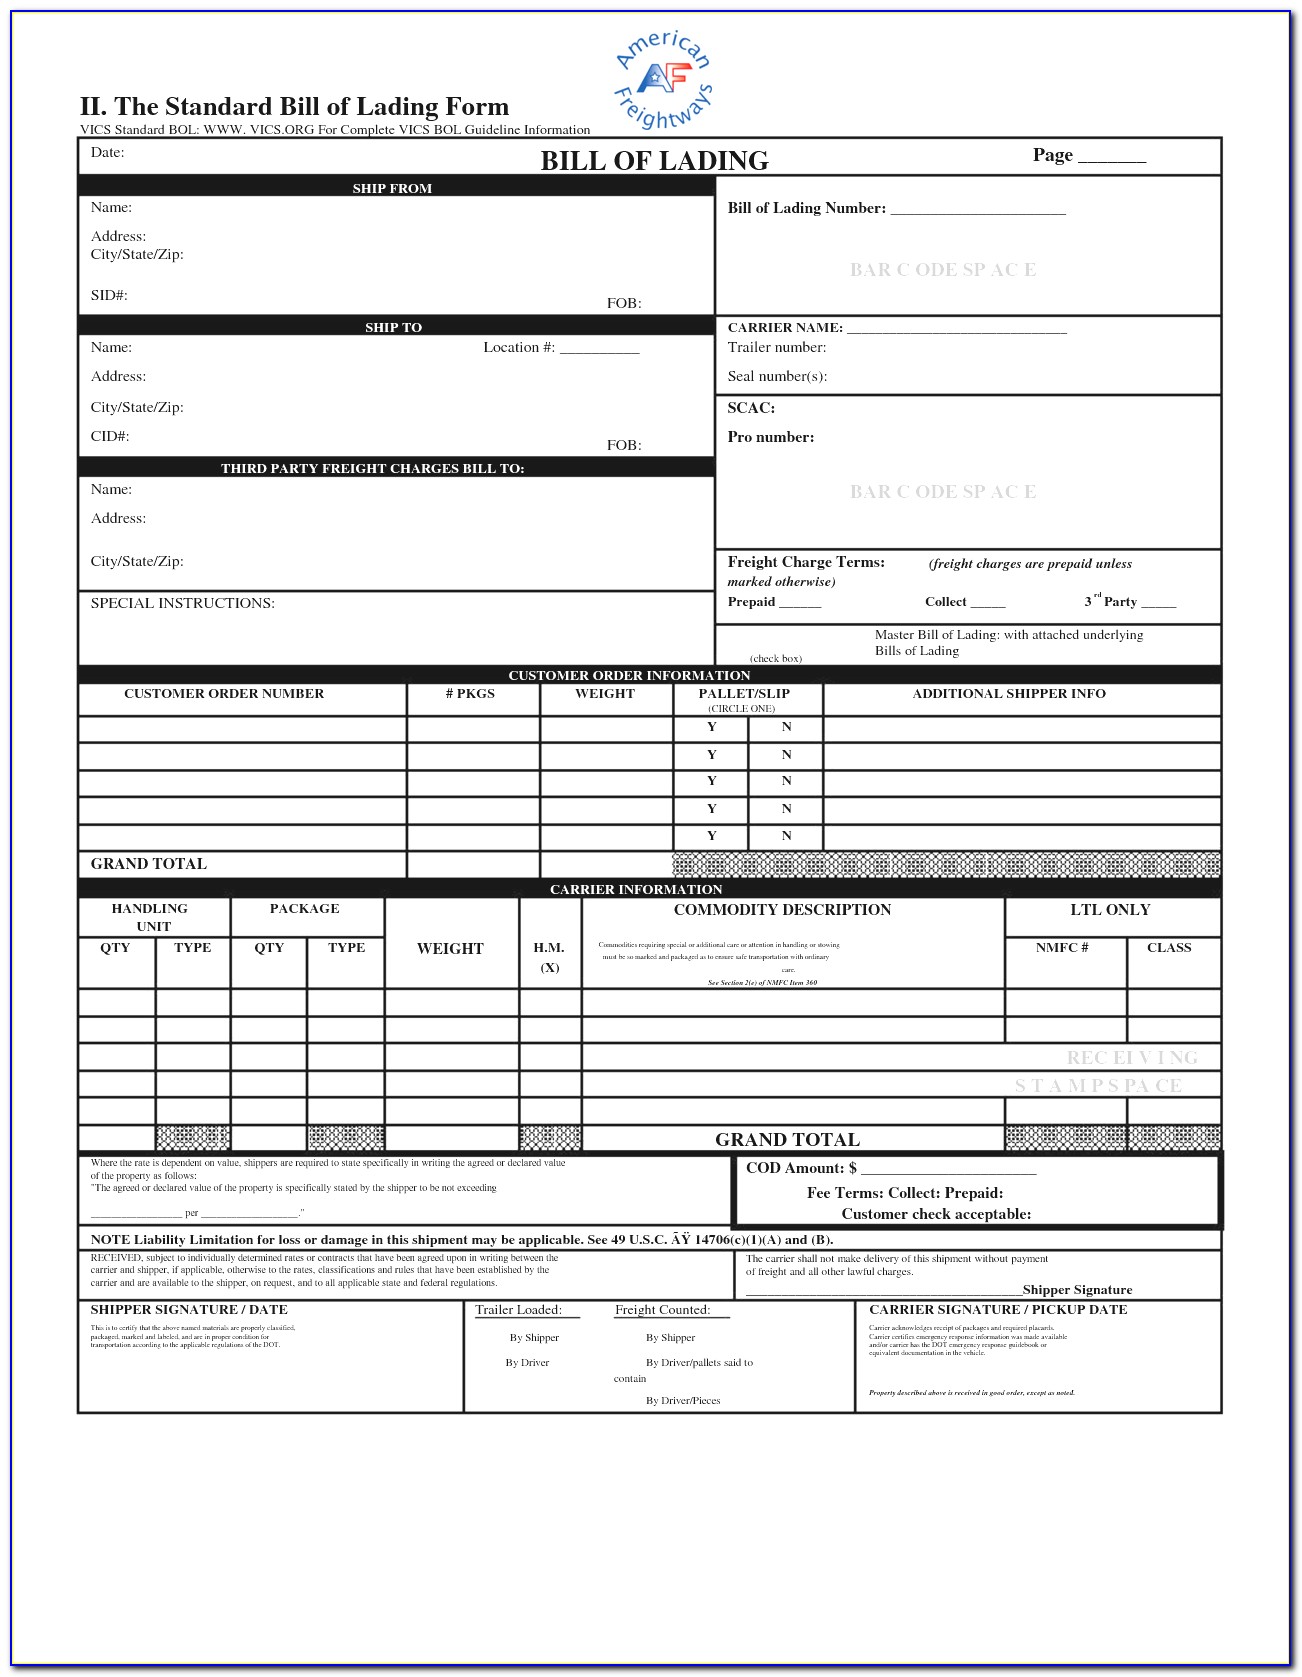 bill-of-lading-sample-pdf-master-of-template-document